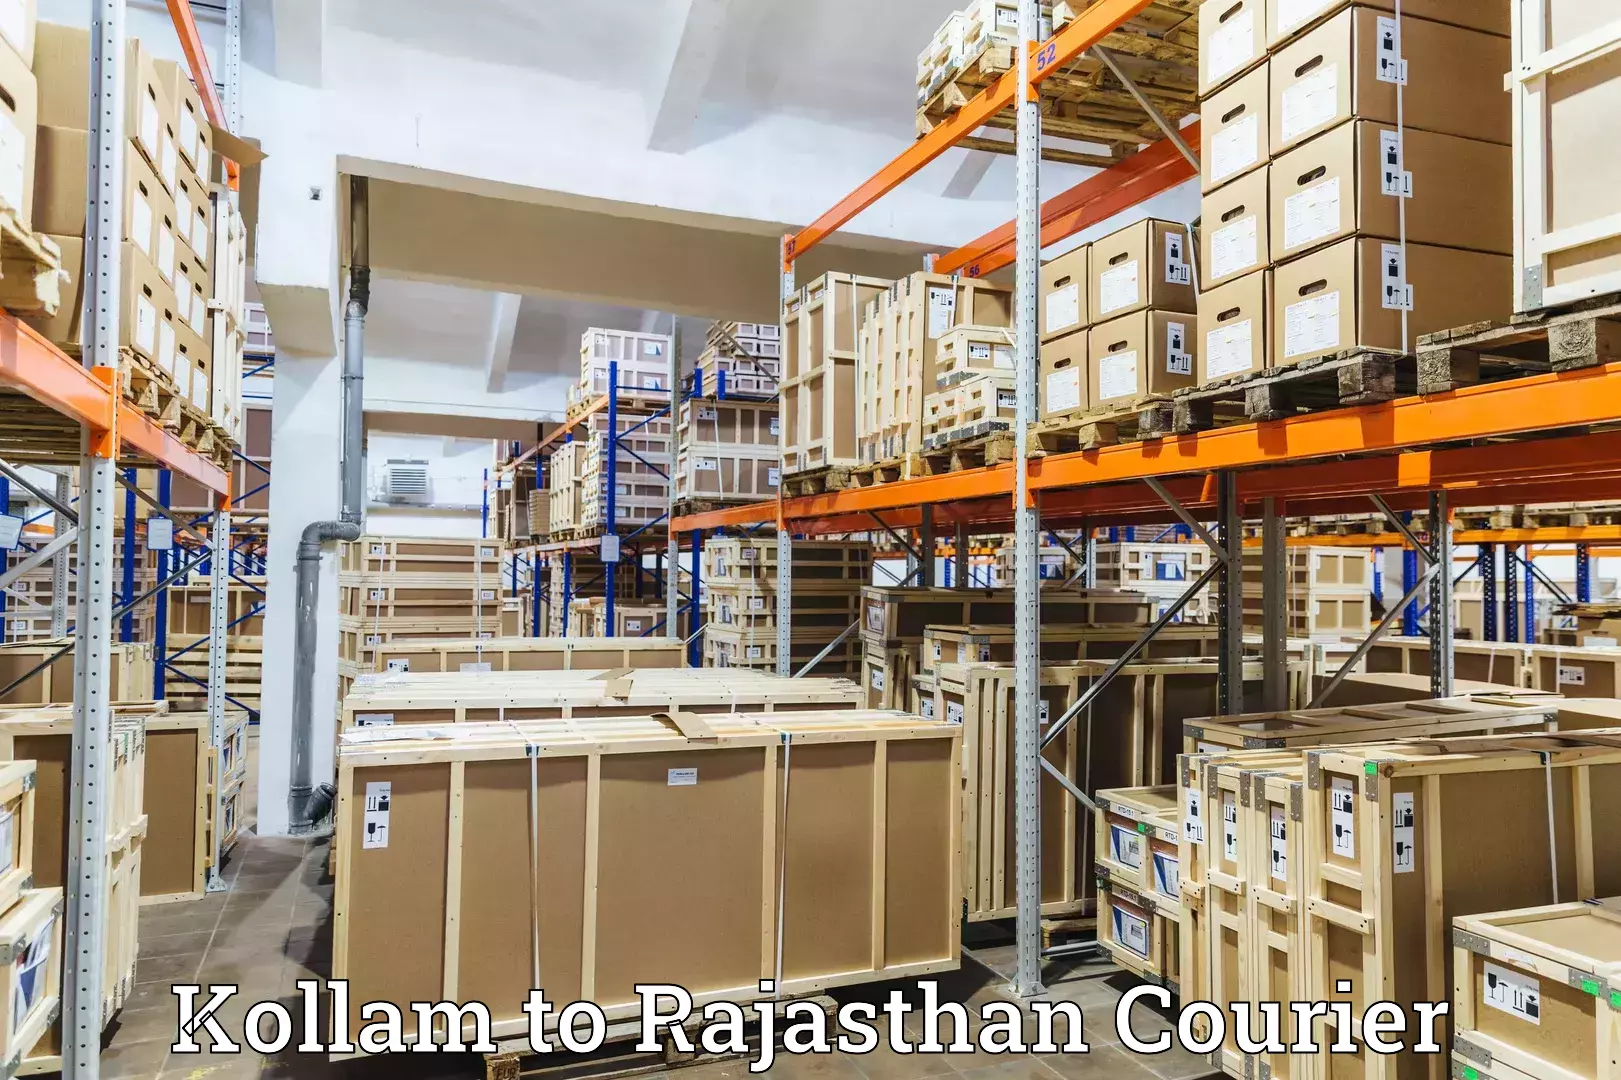 State-of-the-art courier technology Kollam to Nohar